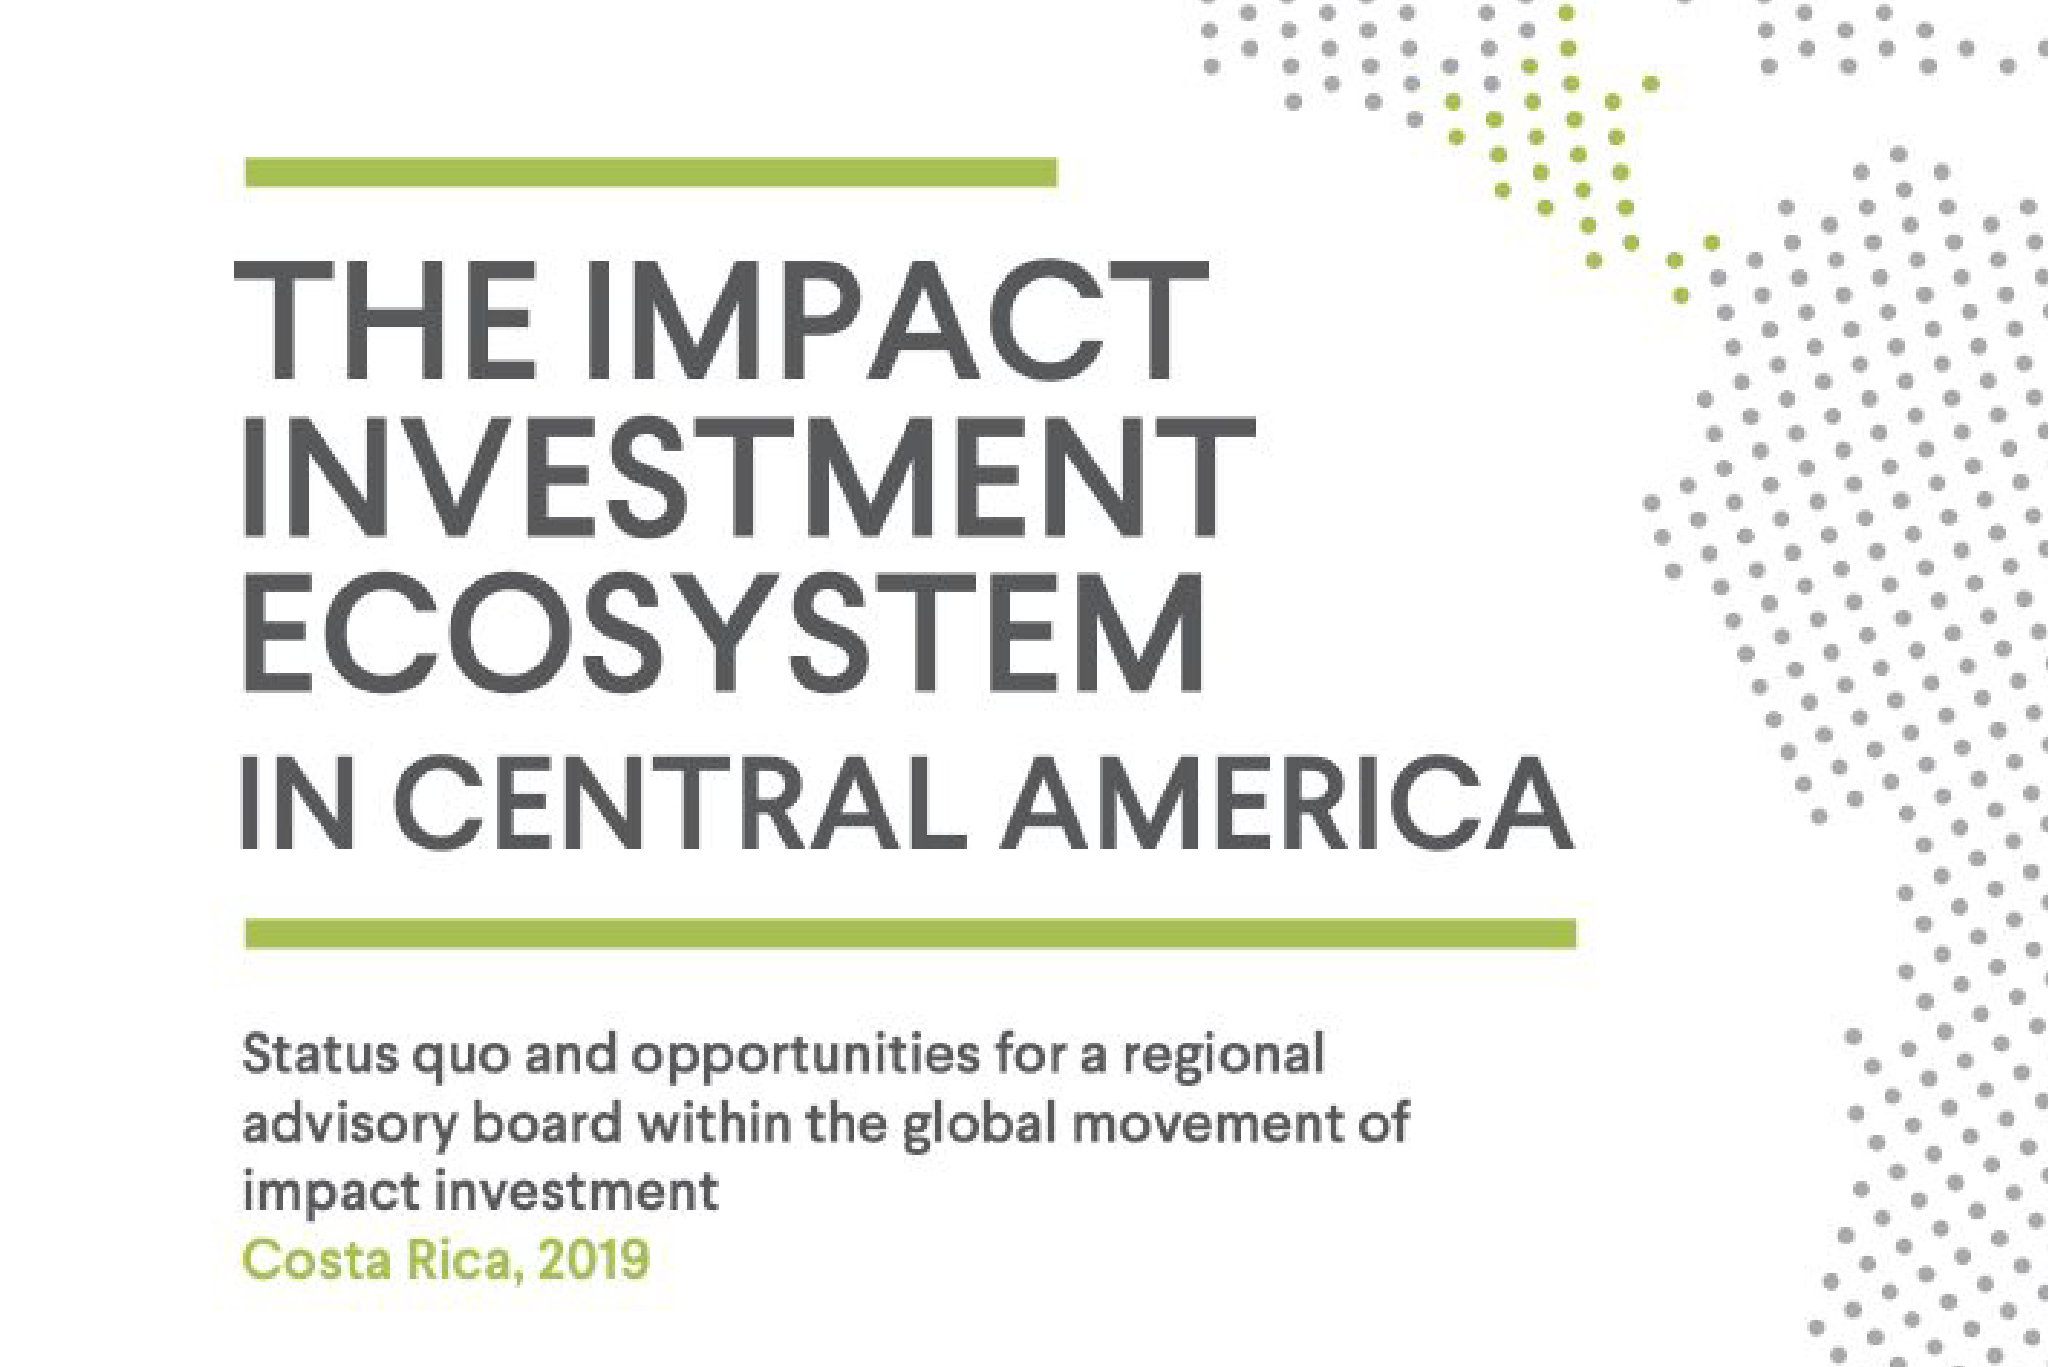 THE IMPACT INVESTMENT ECOSYSTEN IN CENTRAL AMERICA